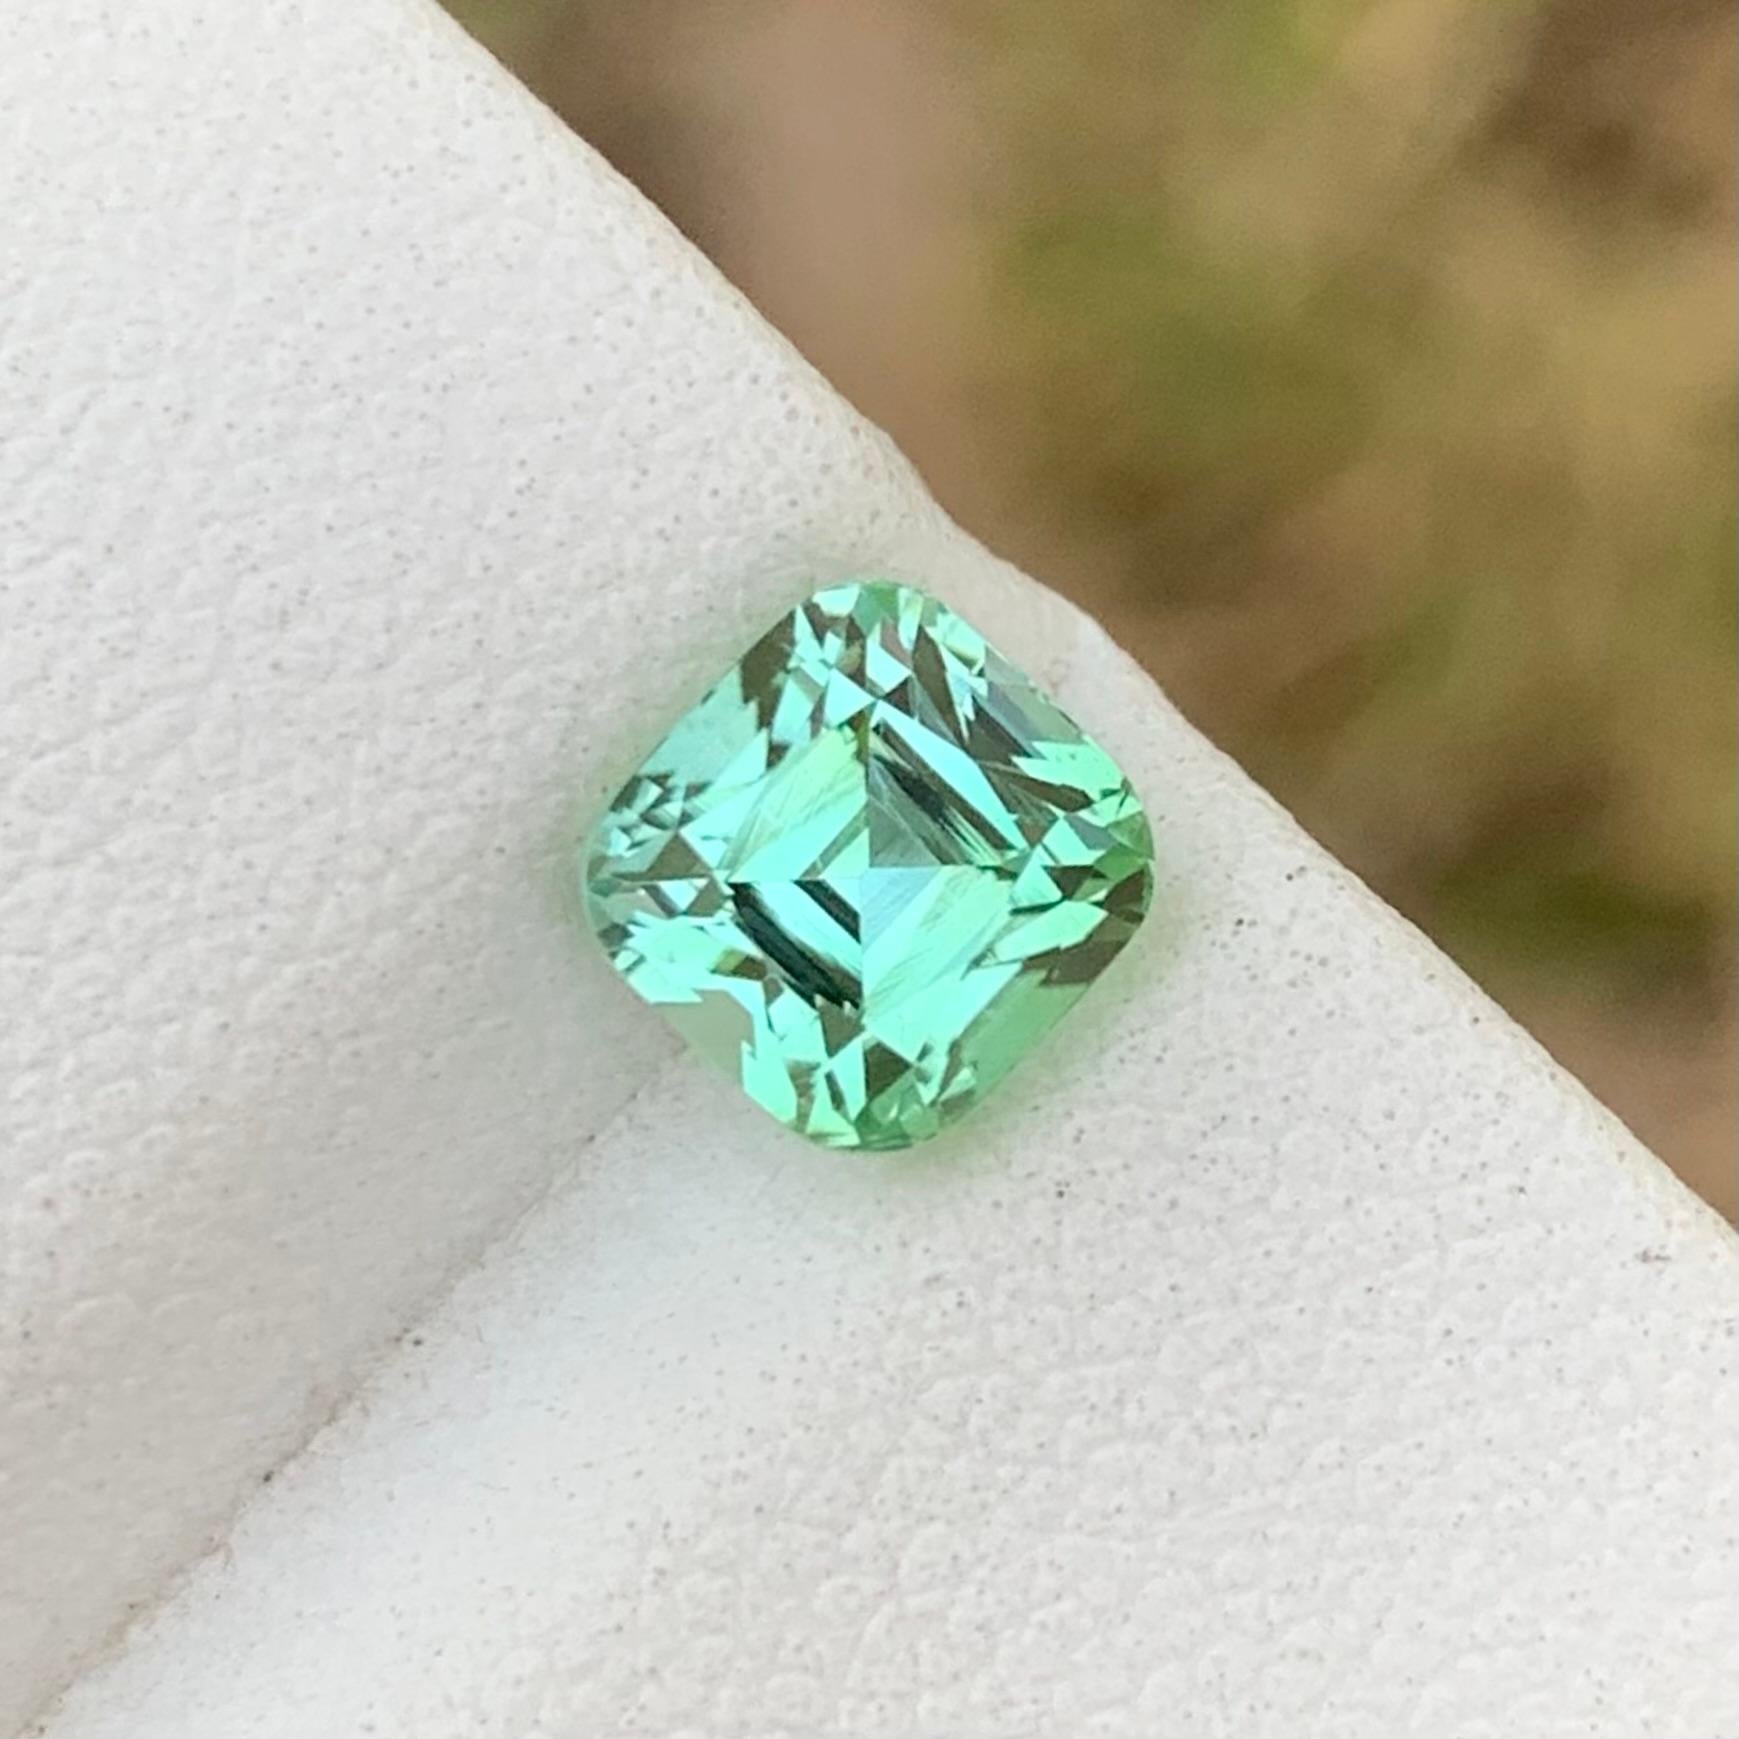 Loose Mint Tourmaline 
Weight: 1.45 Carats 
Dimension: 6.1x5.9x5.5 Mm
Origin: Kunar Afghanistan 
Shape: Cushion 
Color: Mint
Treatment: Non
Certificate: On Demand 
Mint tourmaline is a captivating variety of the tourmaline gemstone family known for